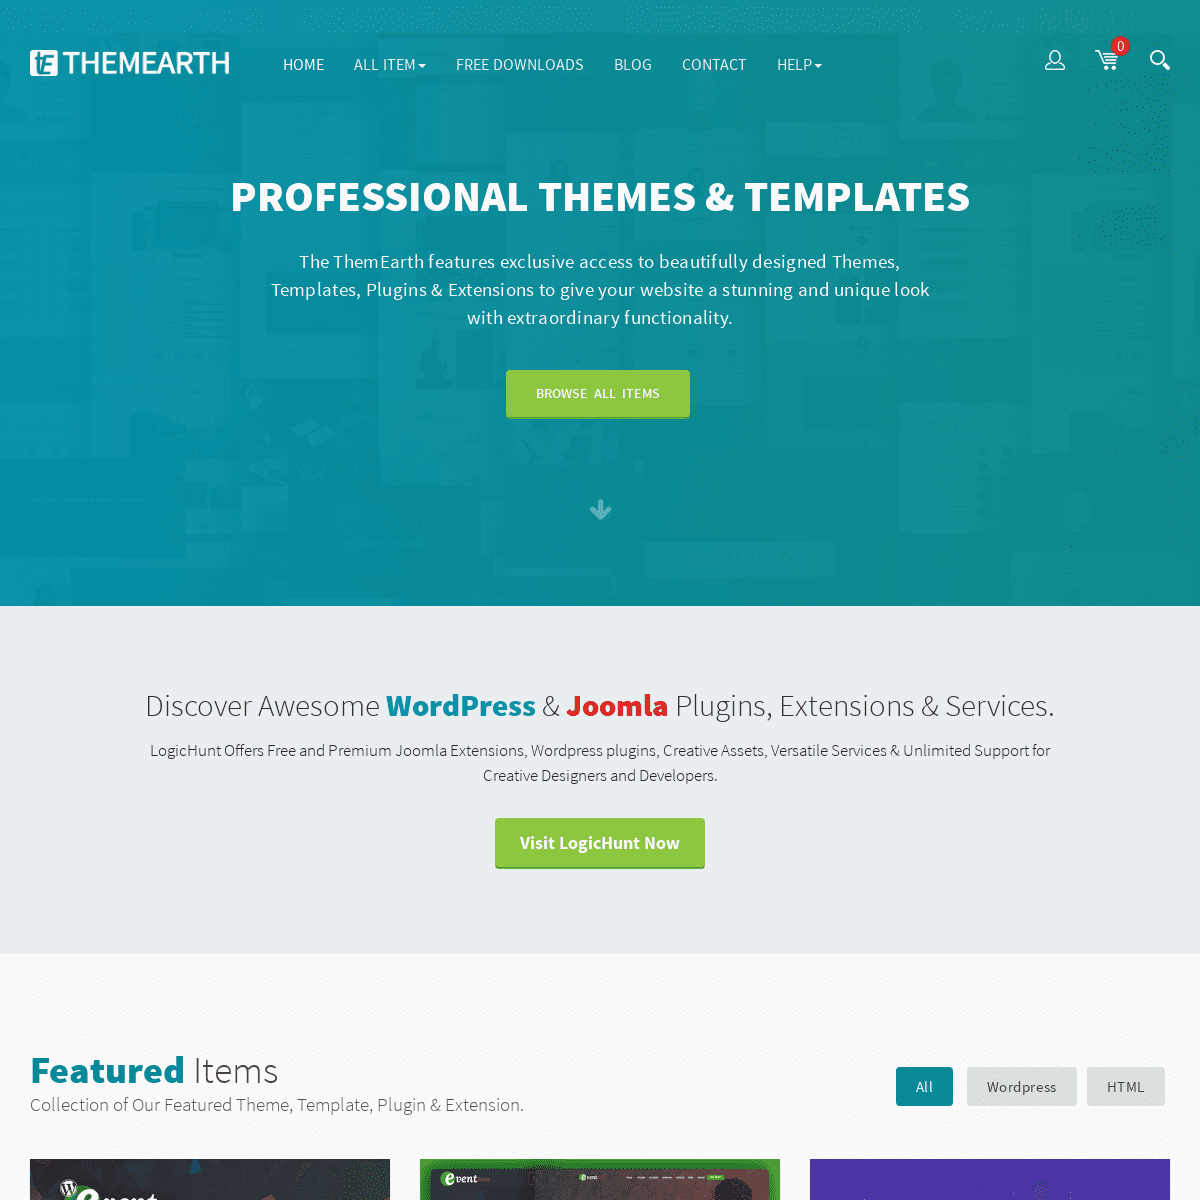 A complete backup of themearth.com